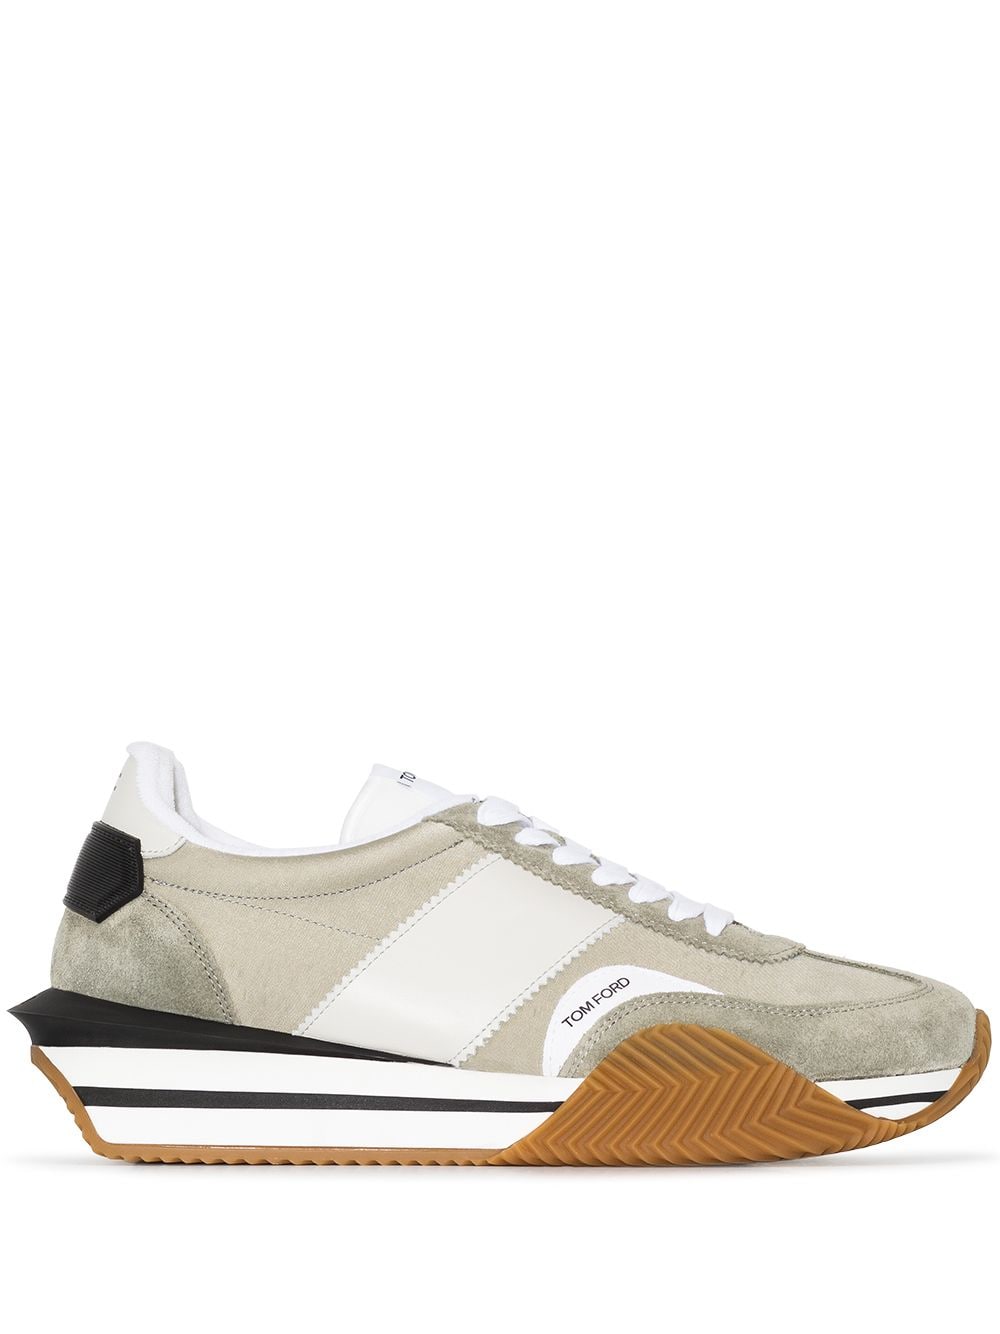 TOM FORD Lace Up James Sneakers